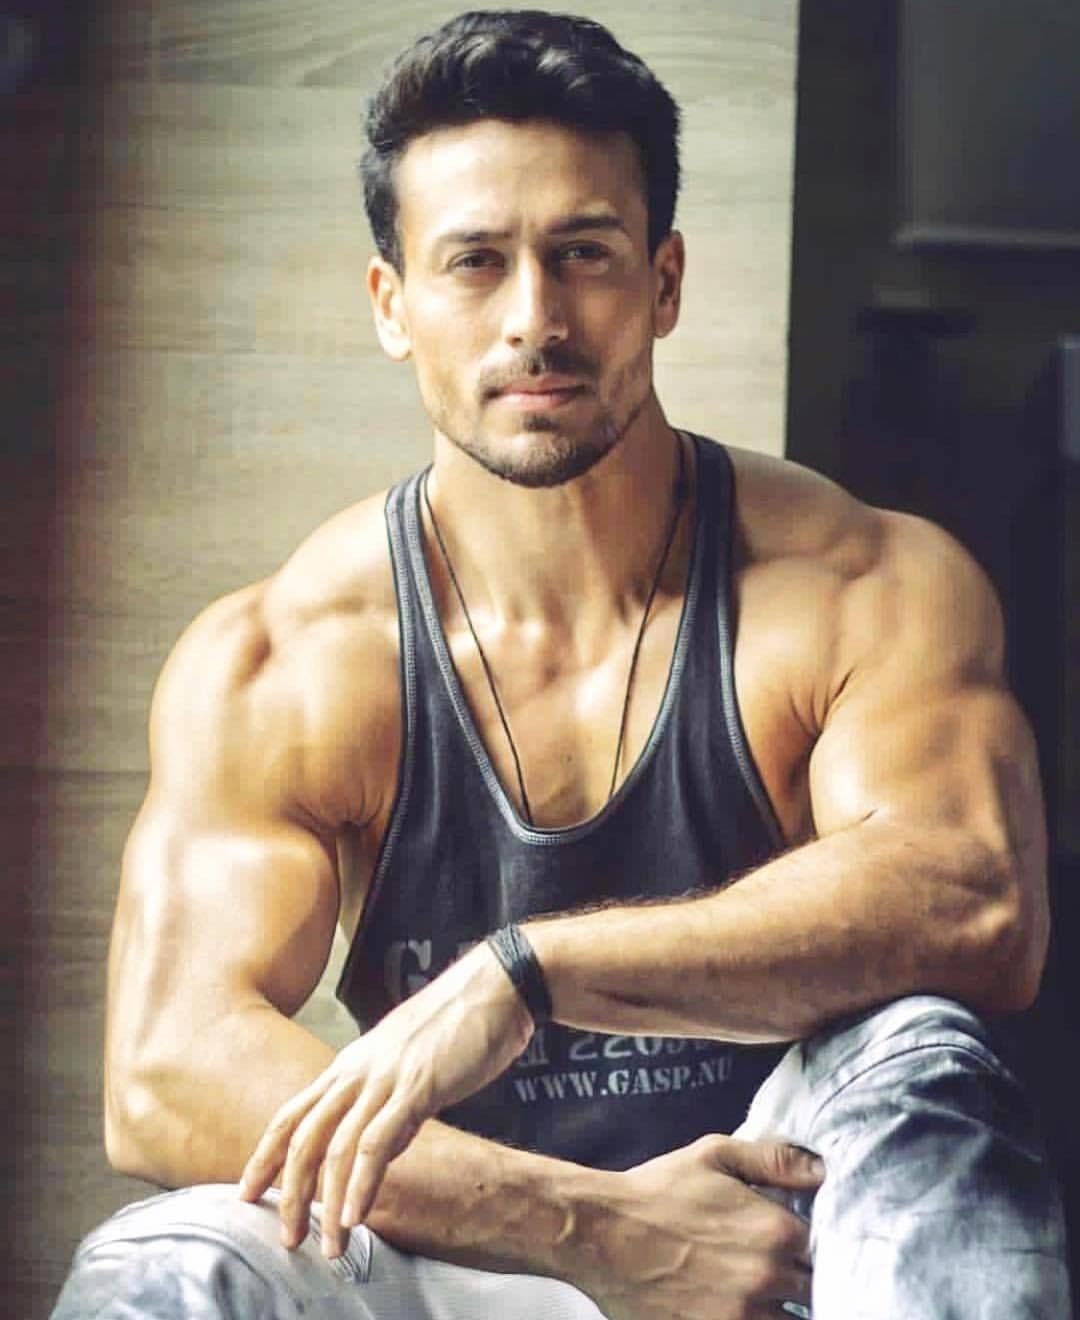 Excited For Baaghi 3 No?. My Fav Tiger Shroff In 2019